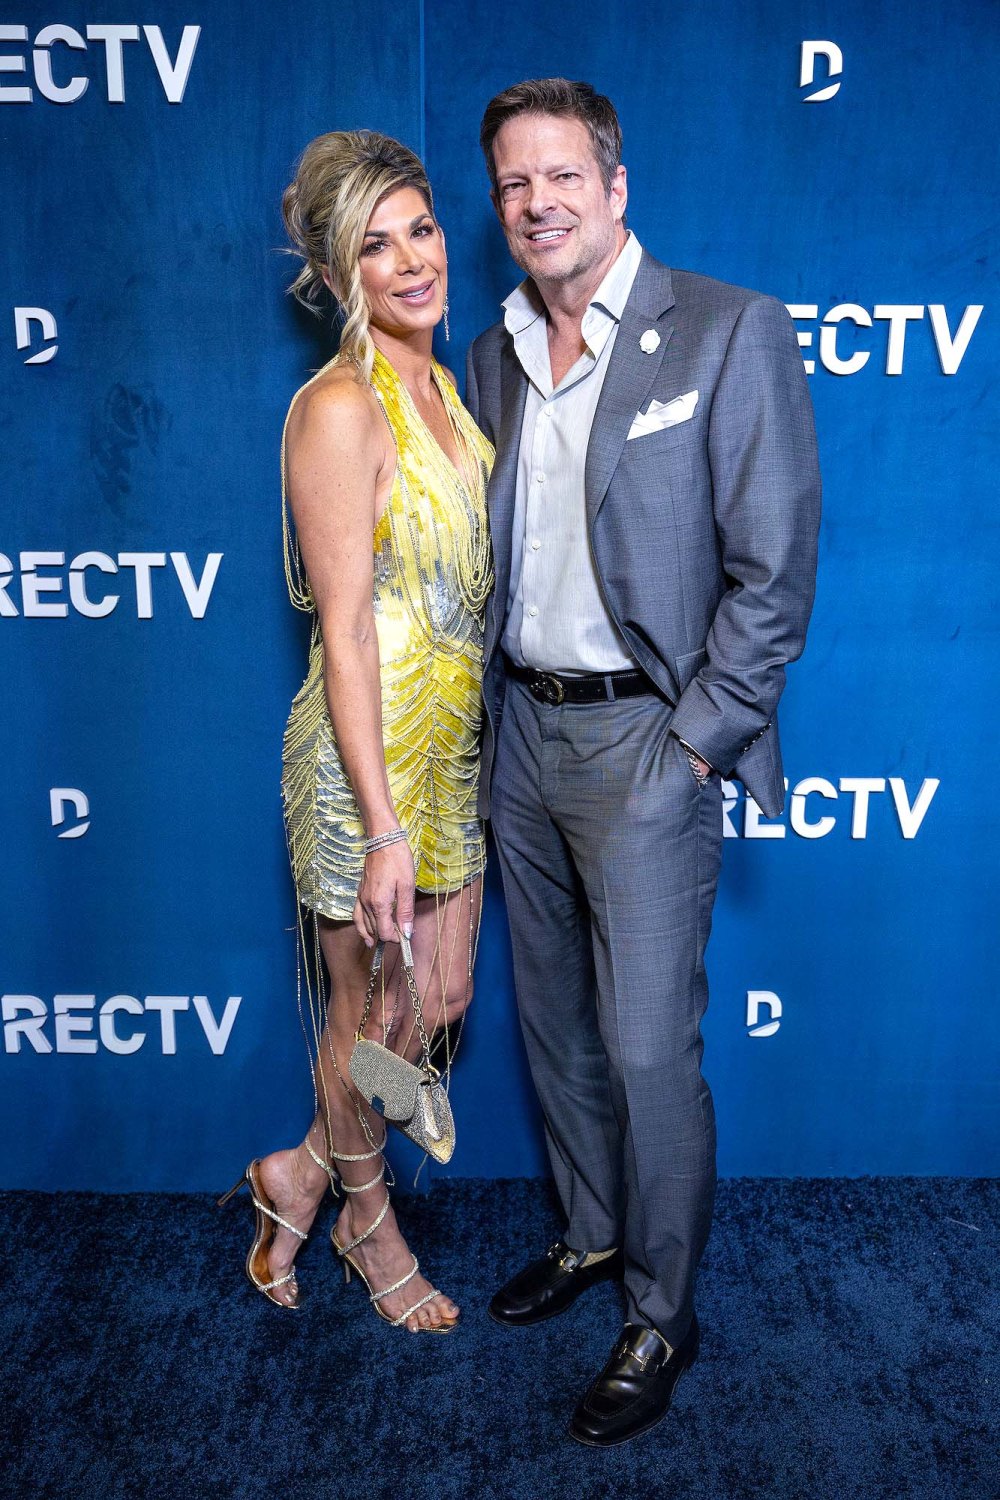 Alexis Bellino Says She Was Nervous for Red Carpet Debut With John Janssen